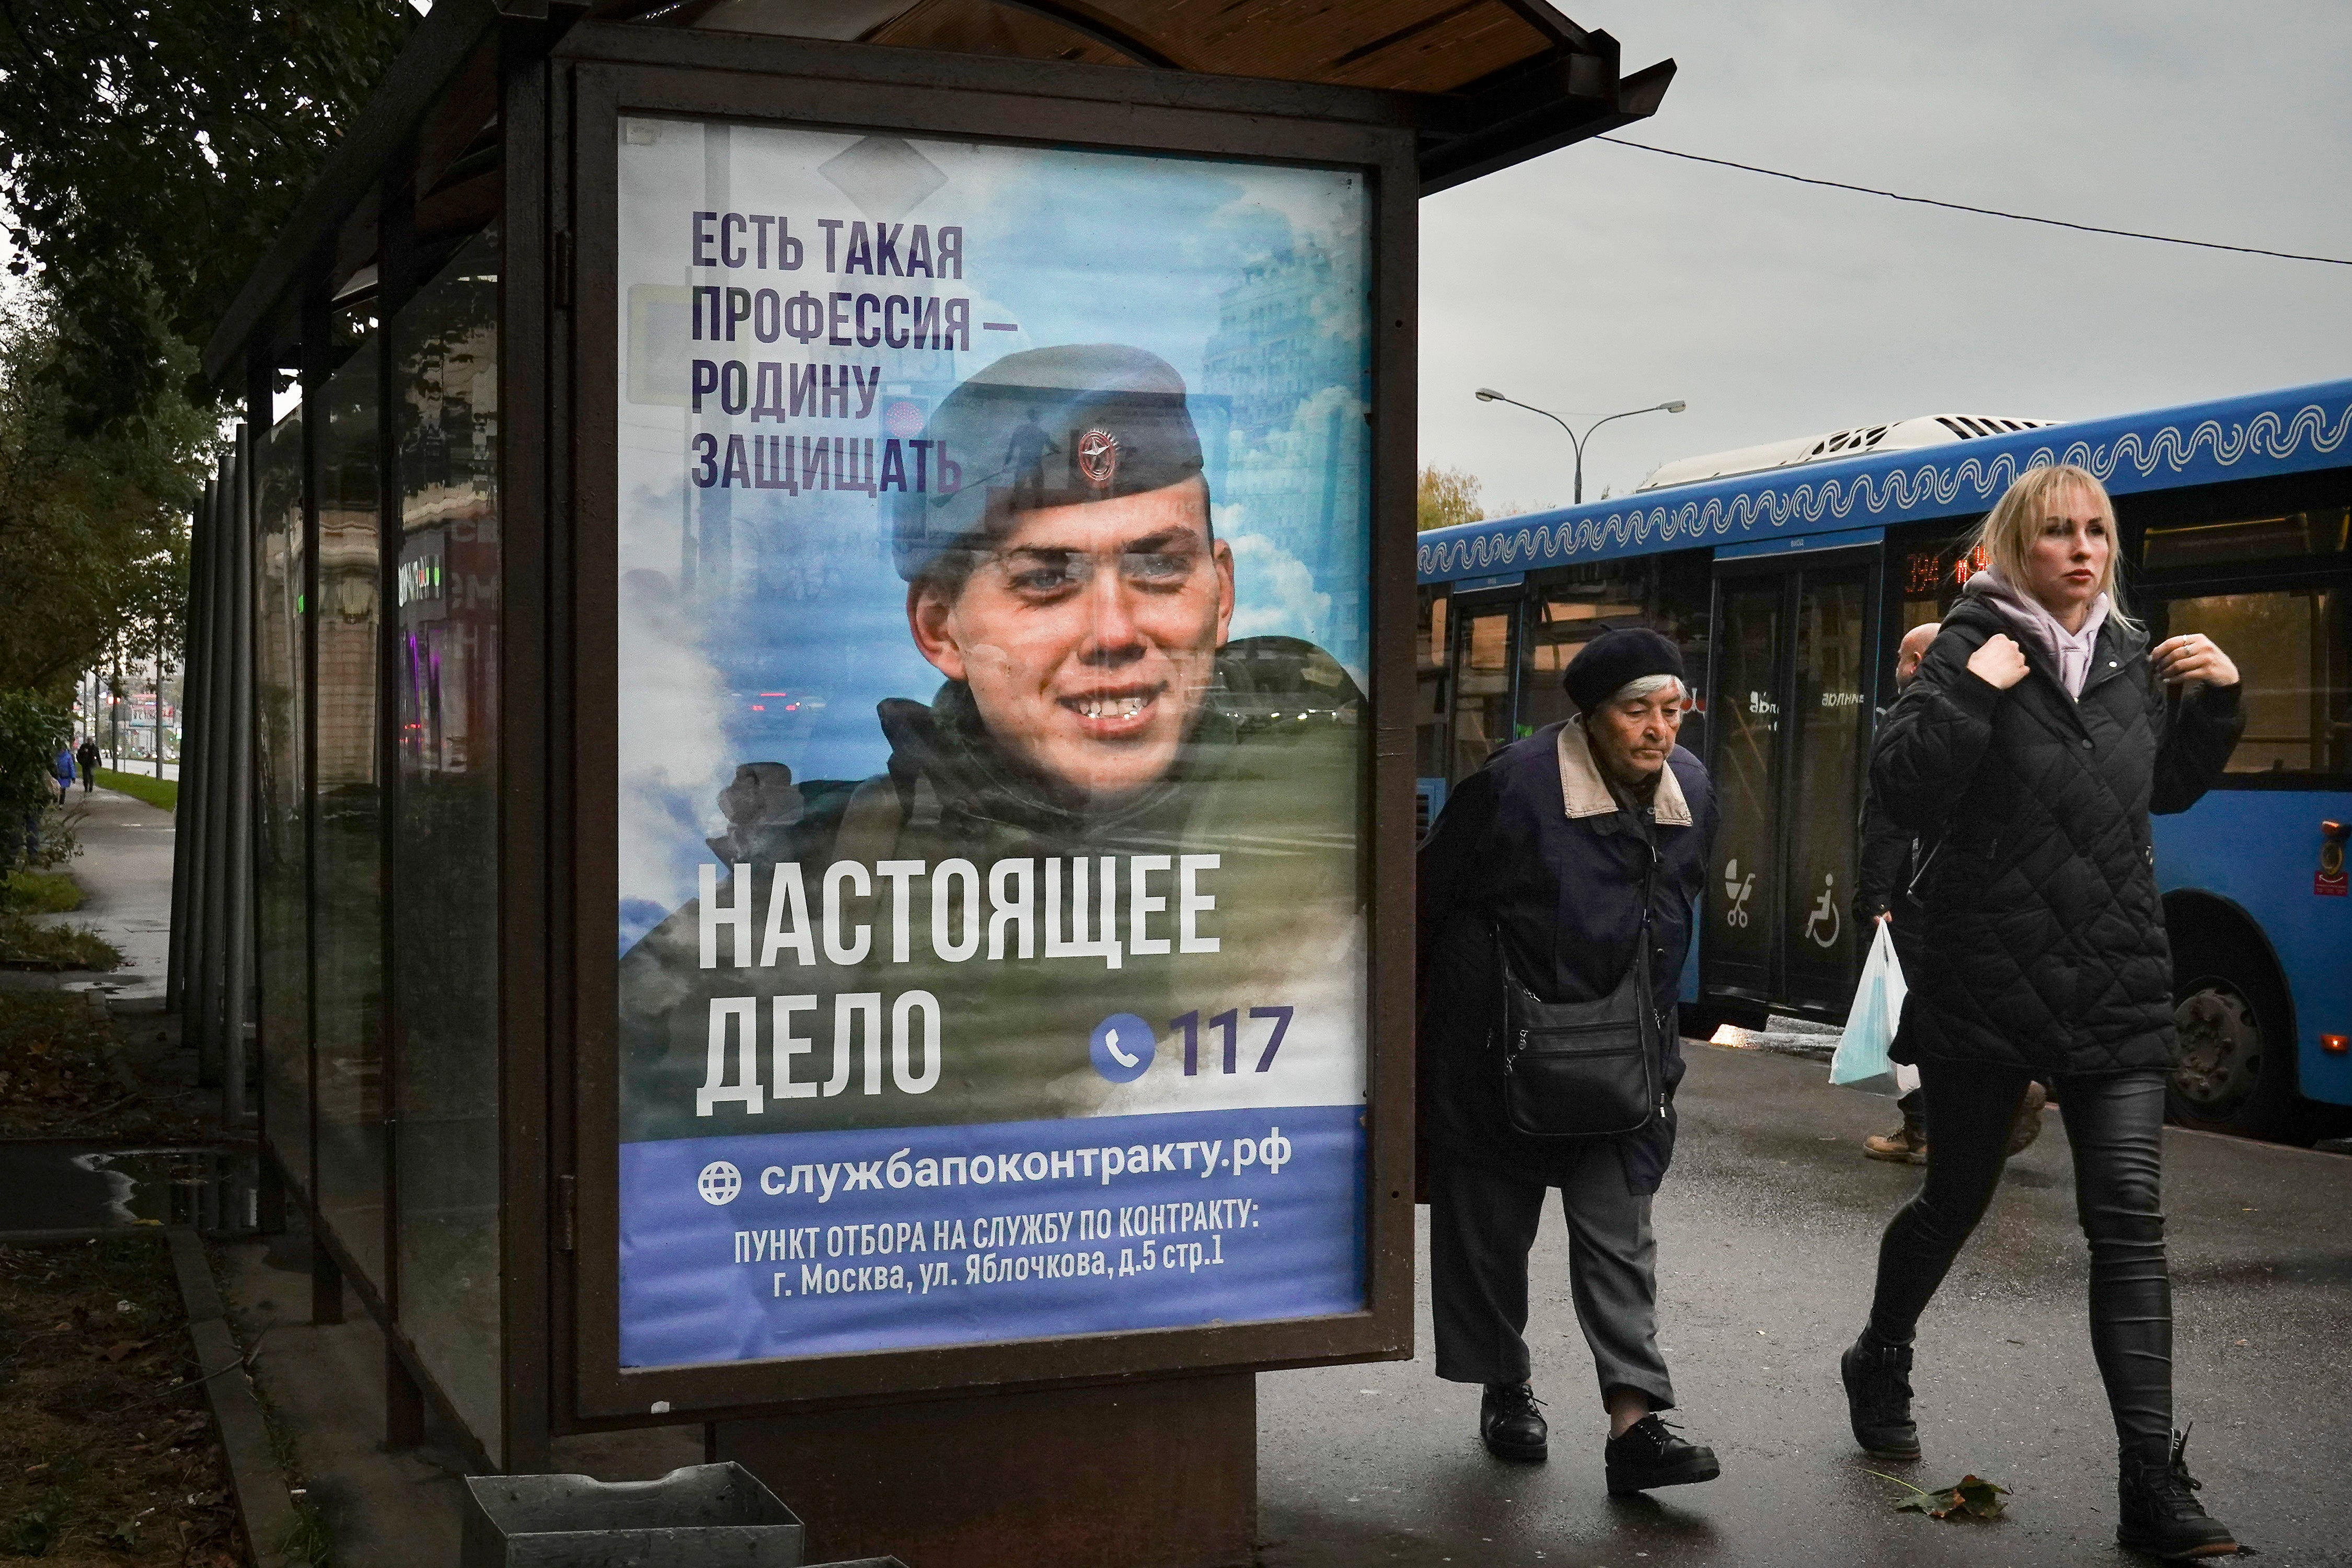 Poster for military conscription shows a Russian soldier with the slogan 'There is such a profession as defending the homeland. The real deal.'